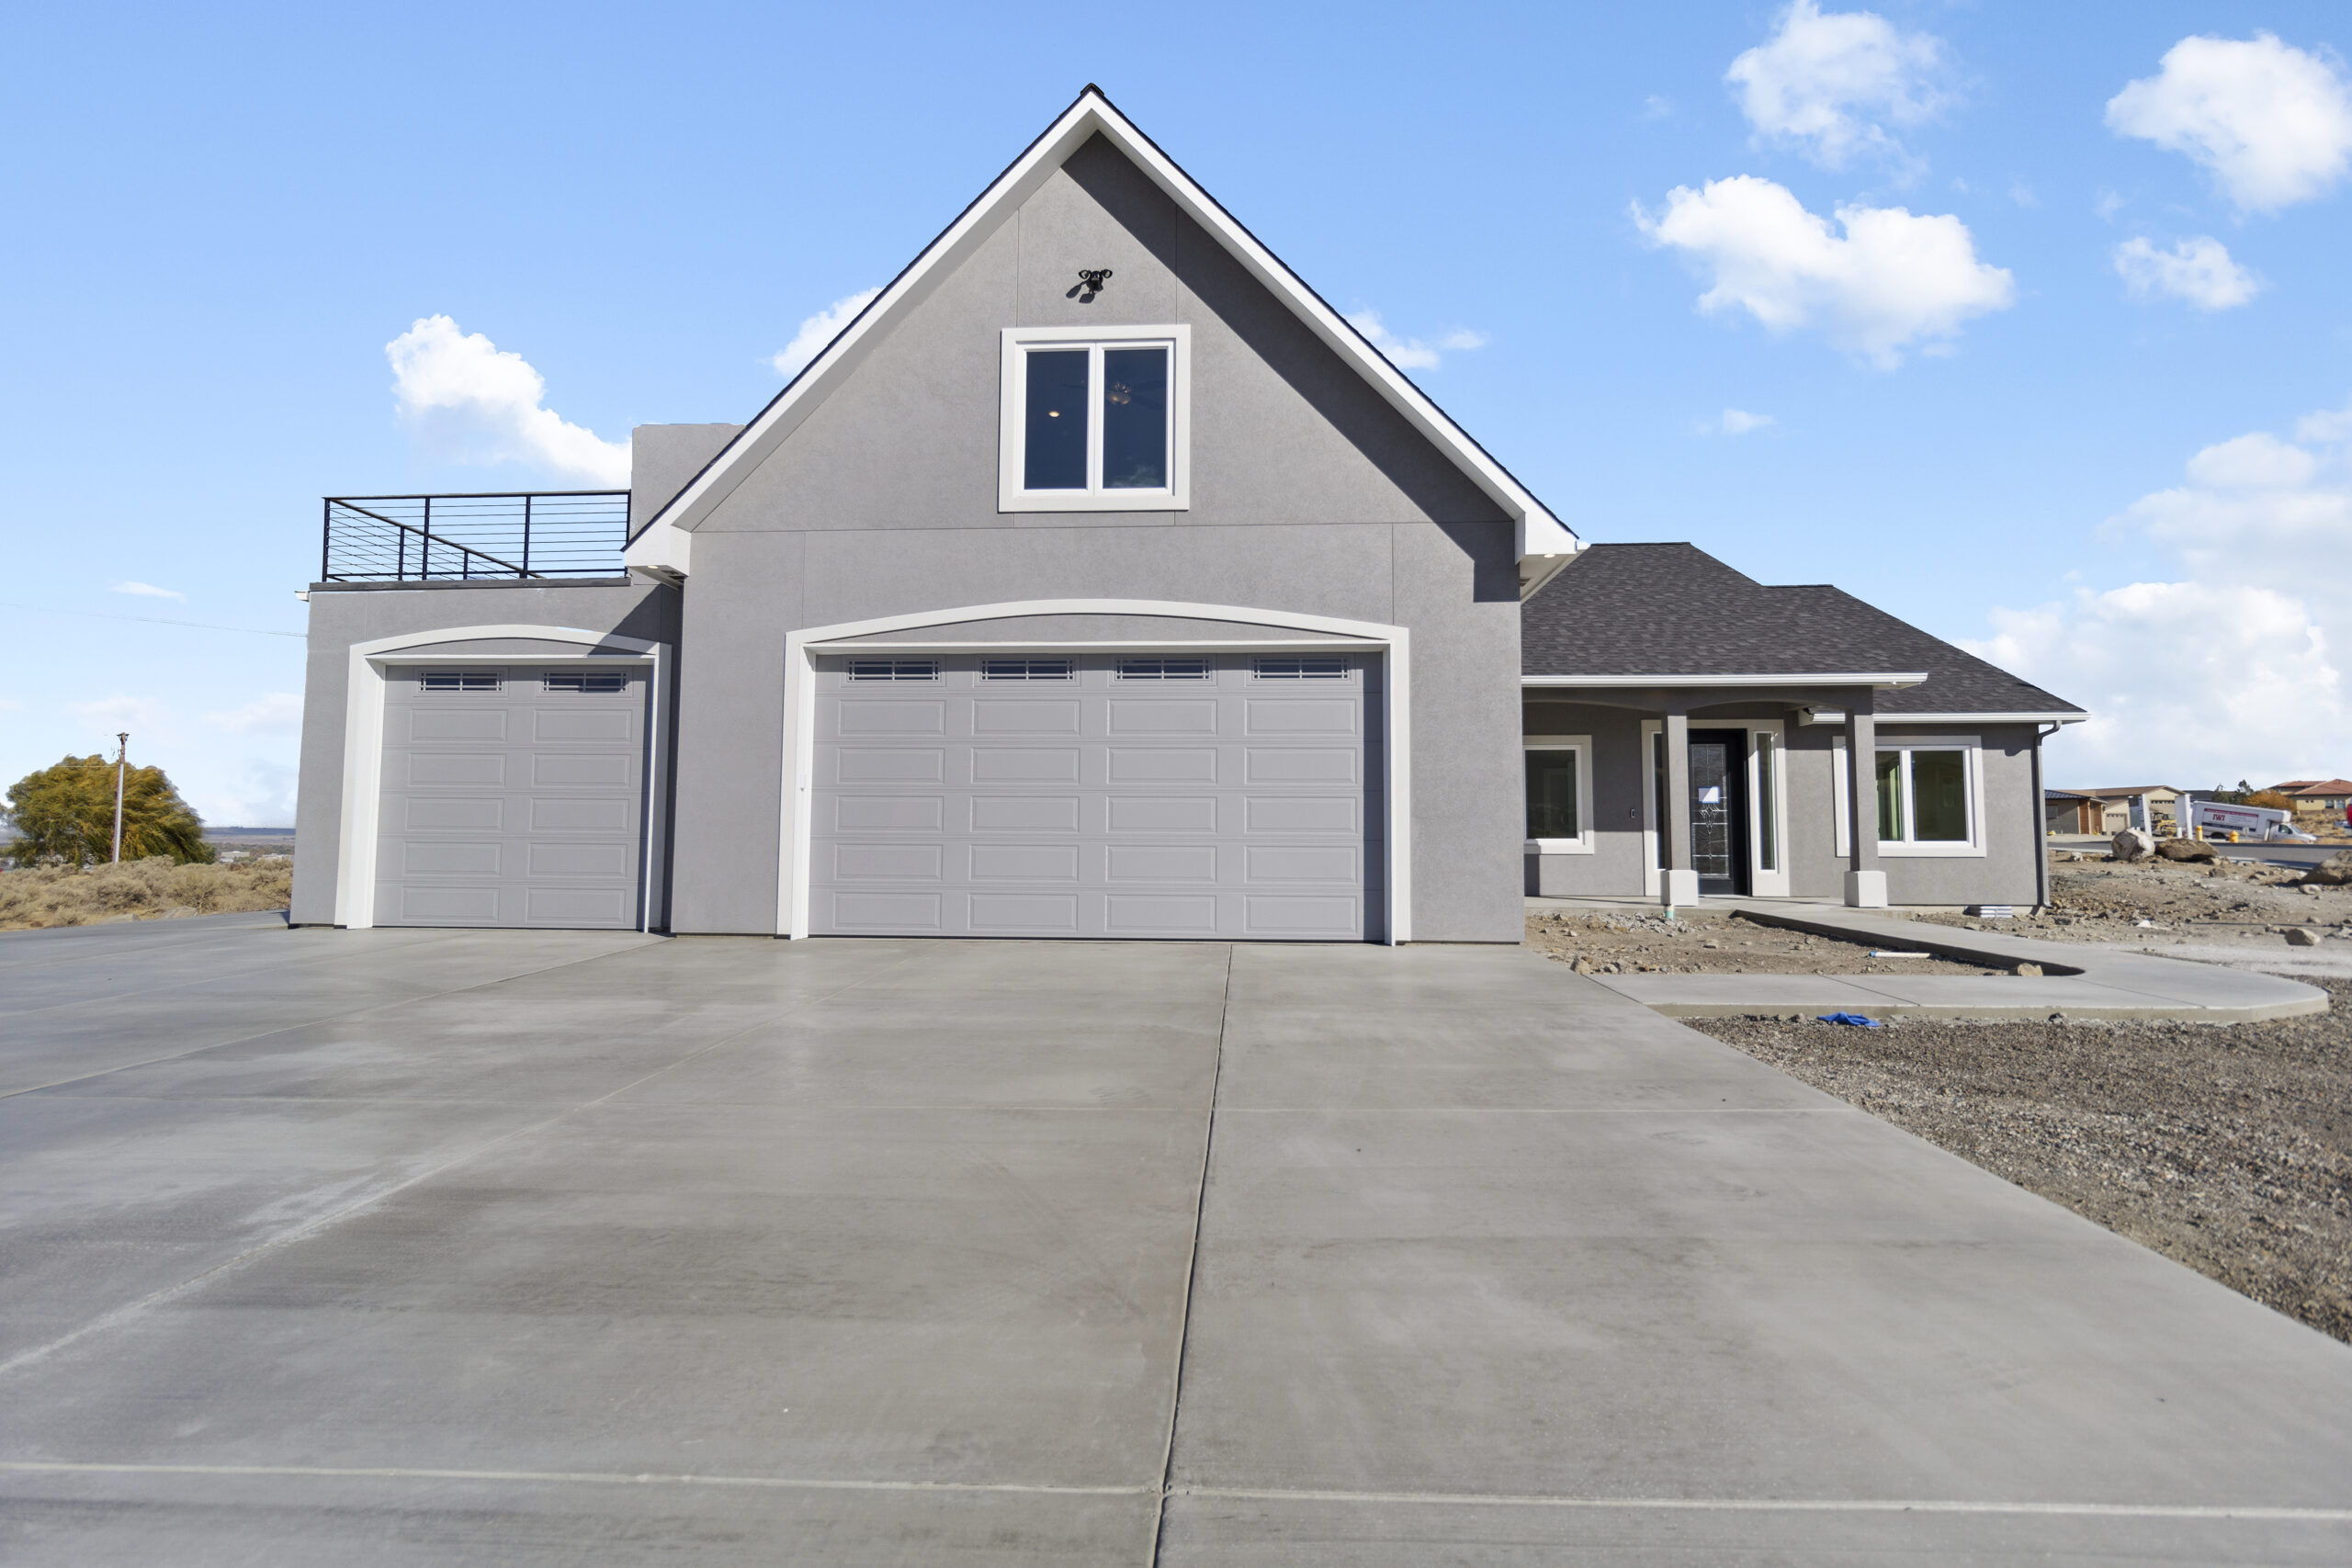 Front view of a modern home featuring garage, walkway, driveway and front yard.